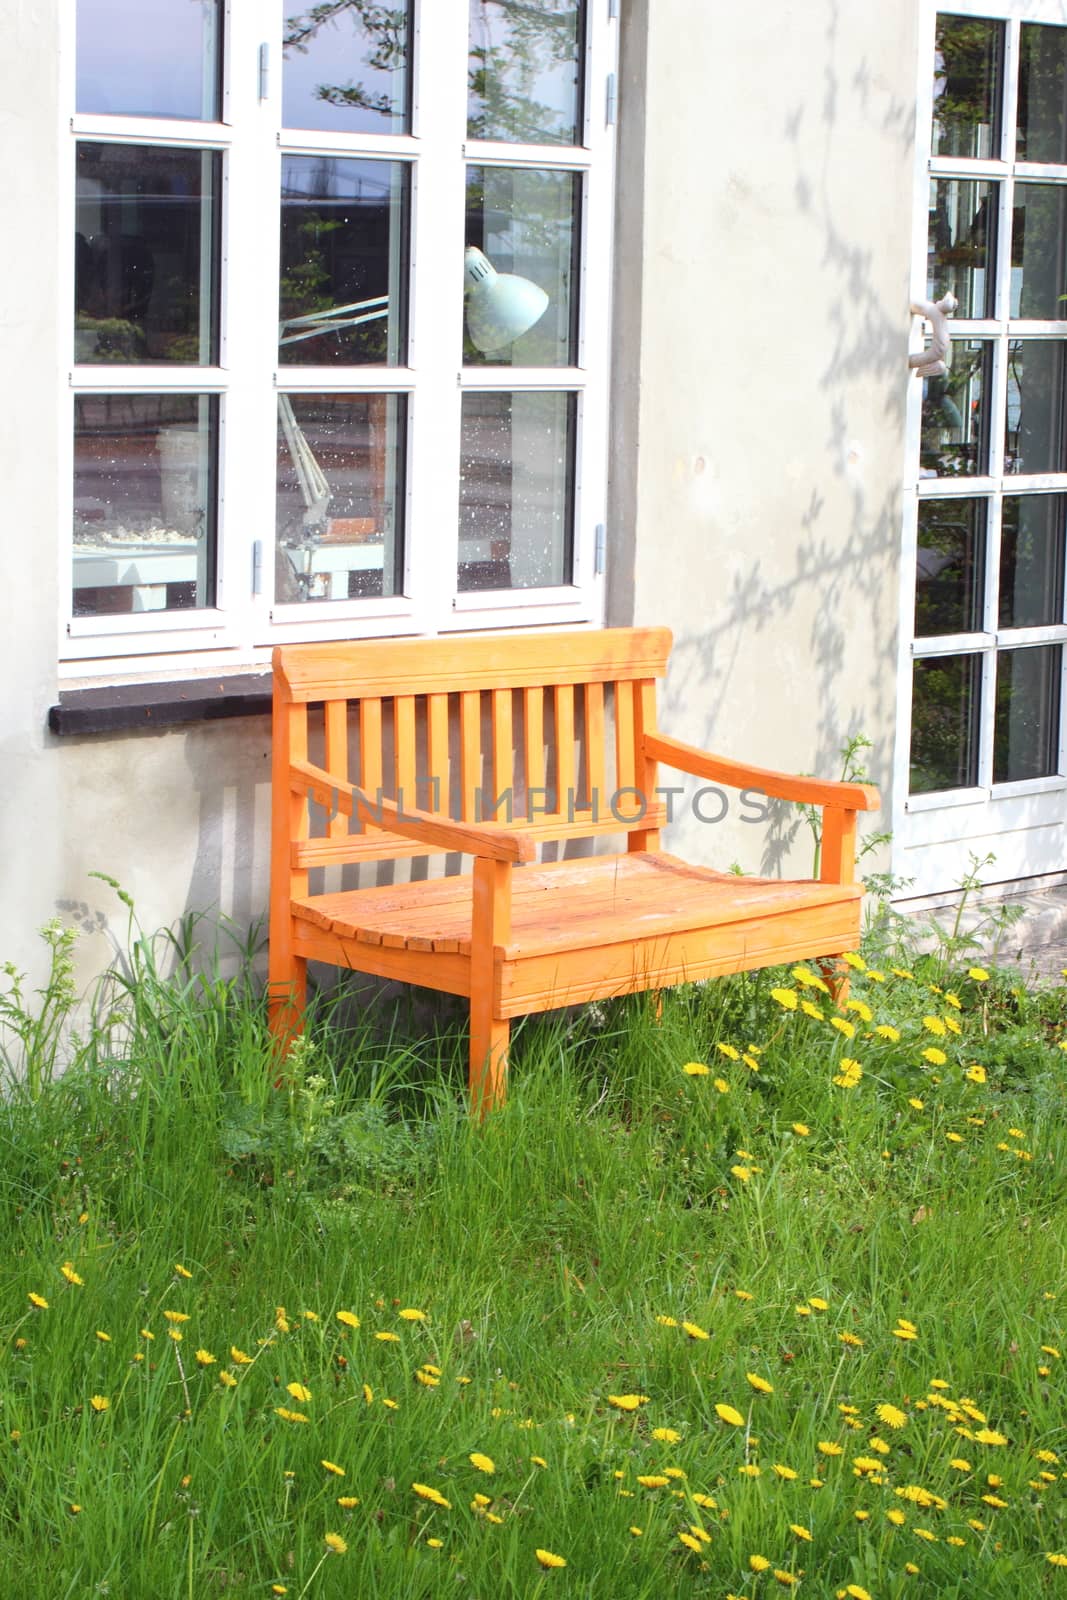 Orange bench on grass with window and lamp in background by HoleInTheBox